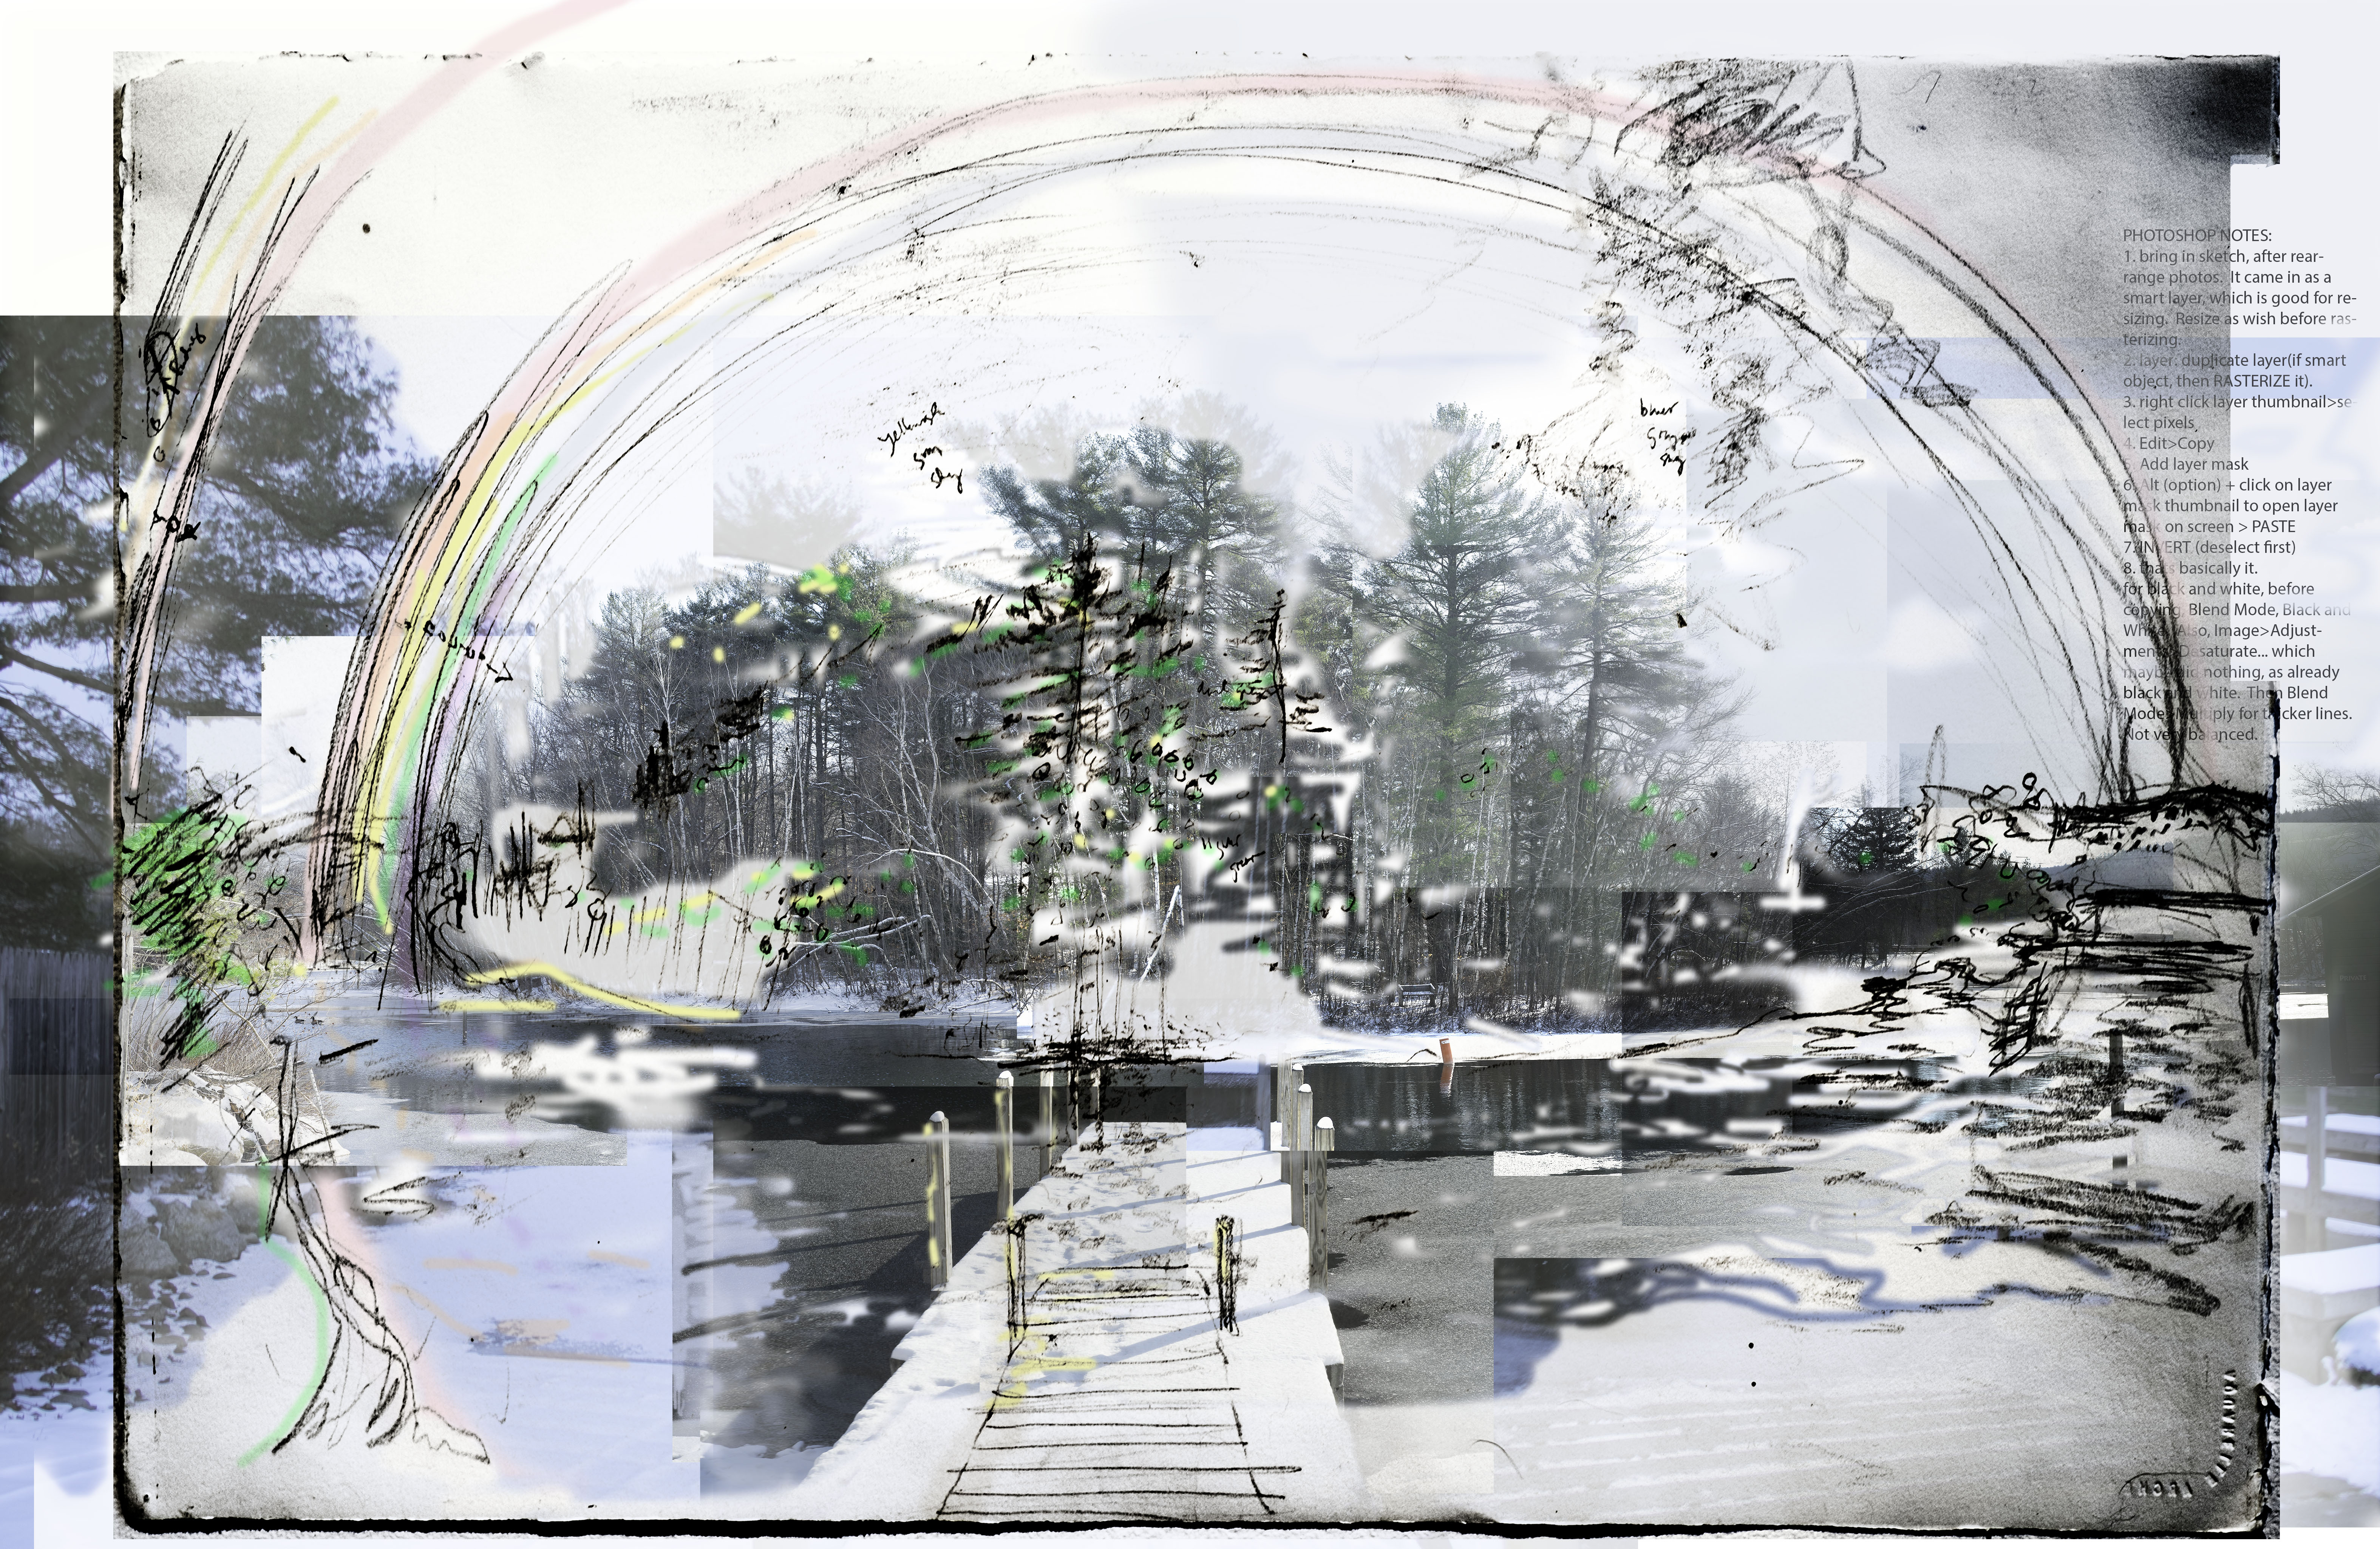 a digital sketch called channel sketch combining photographic collage with a watercolor.